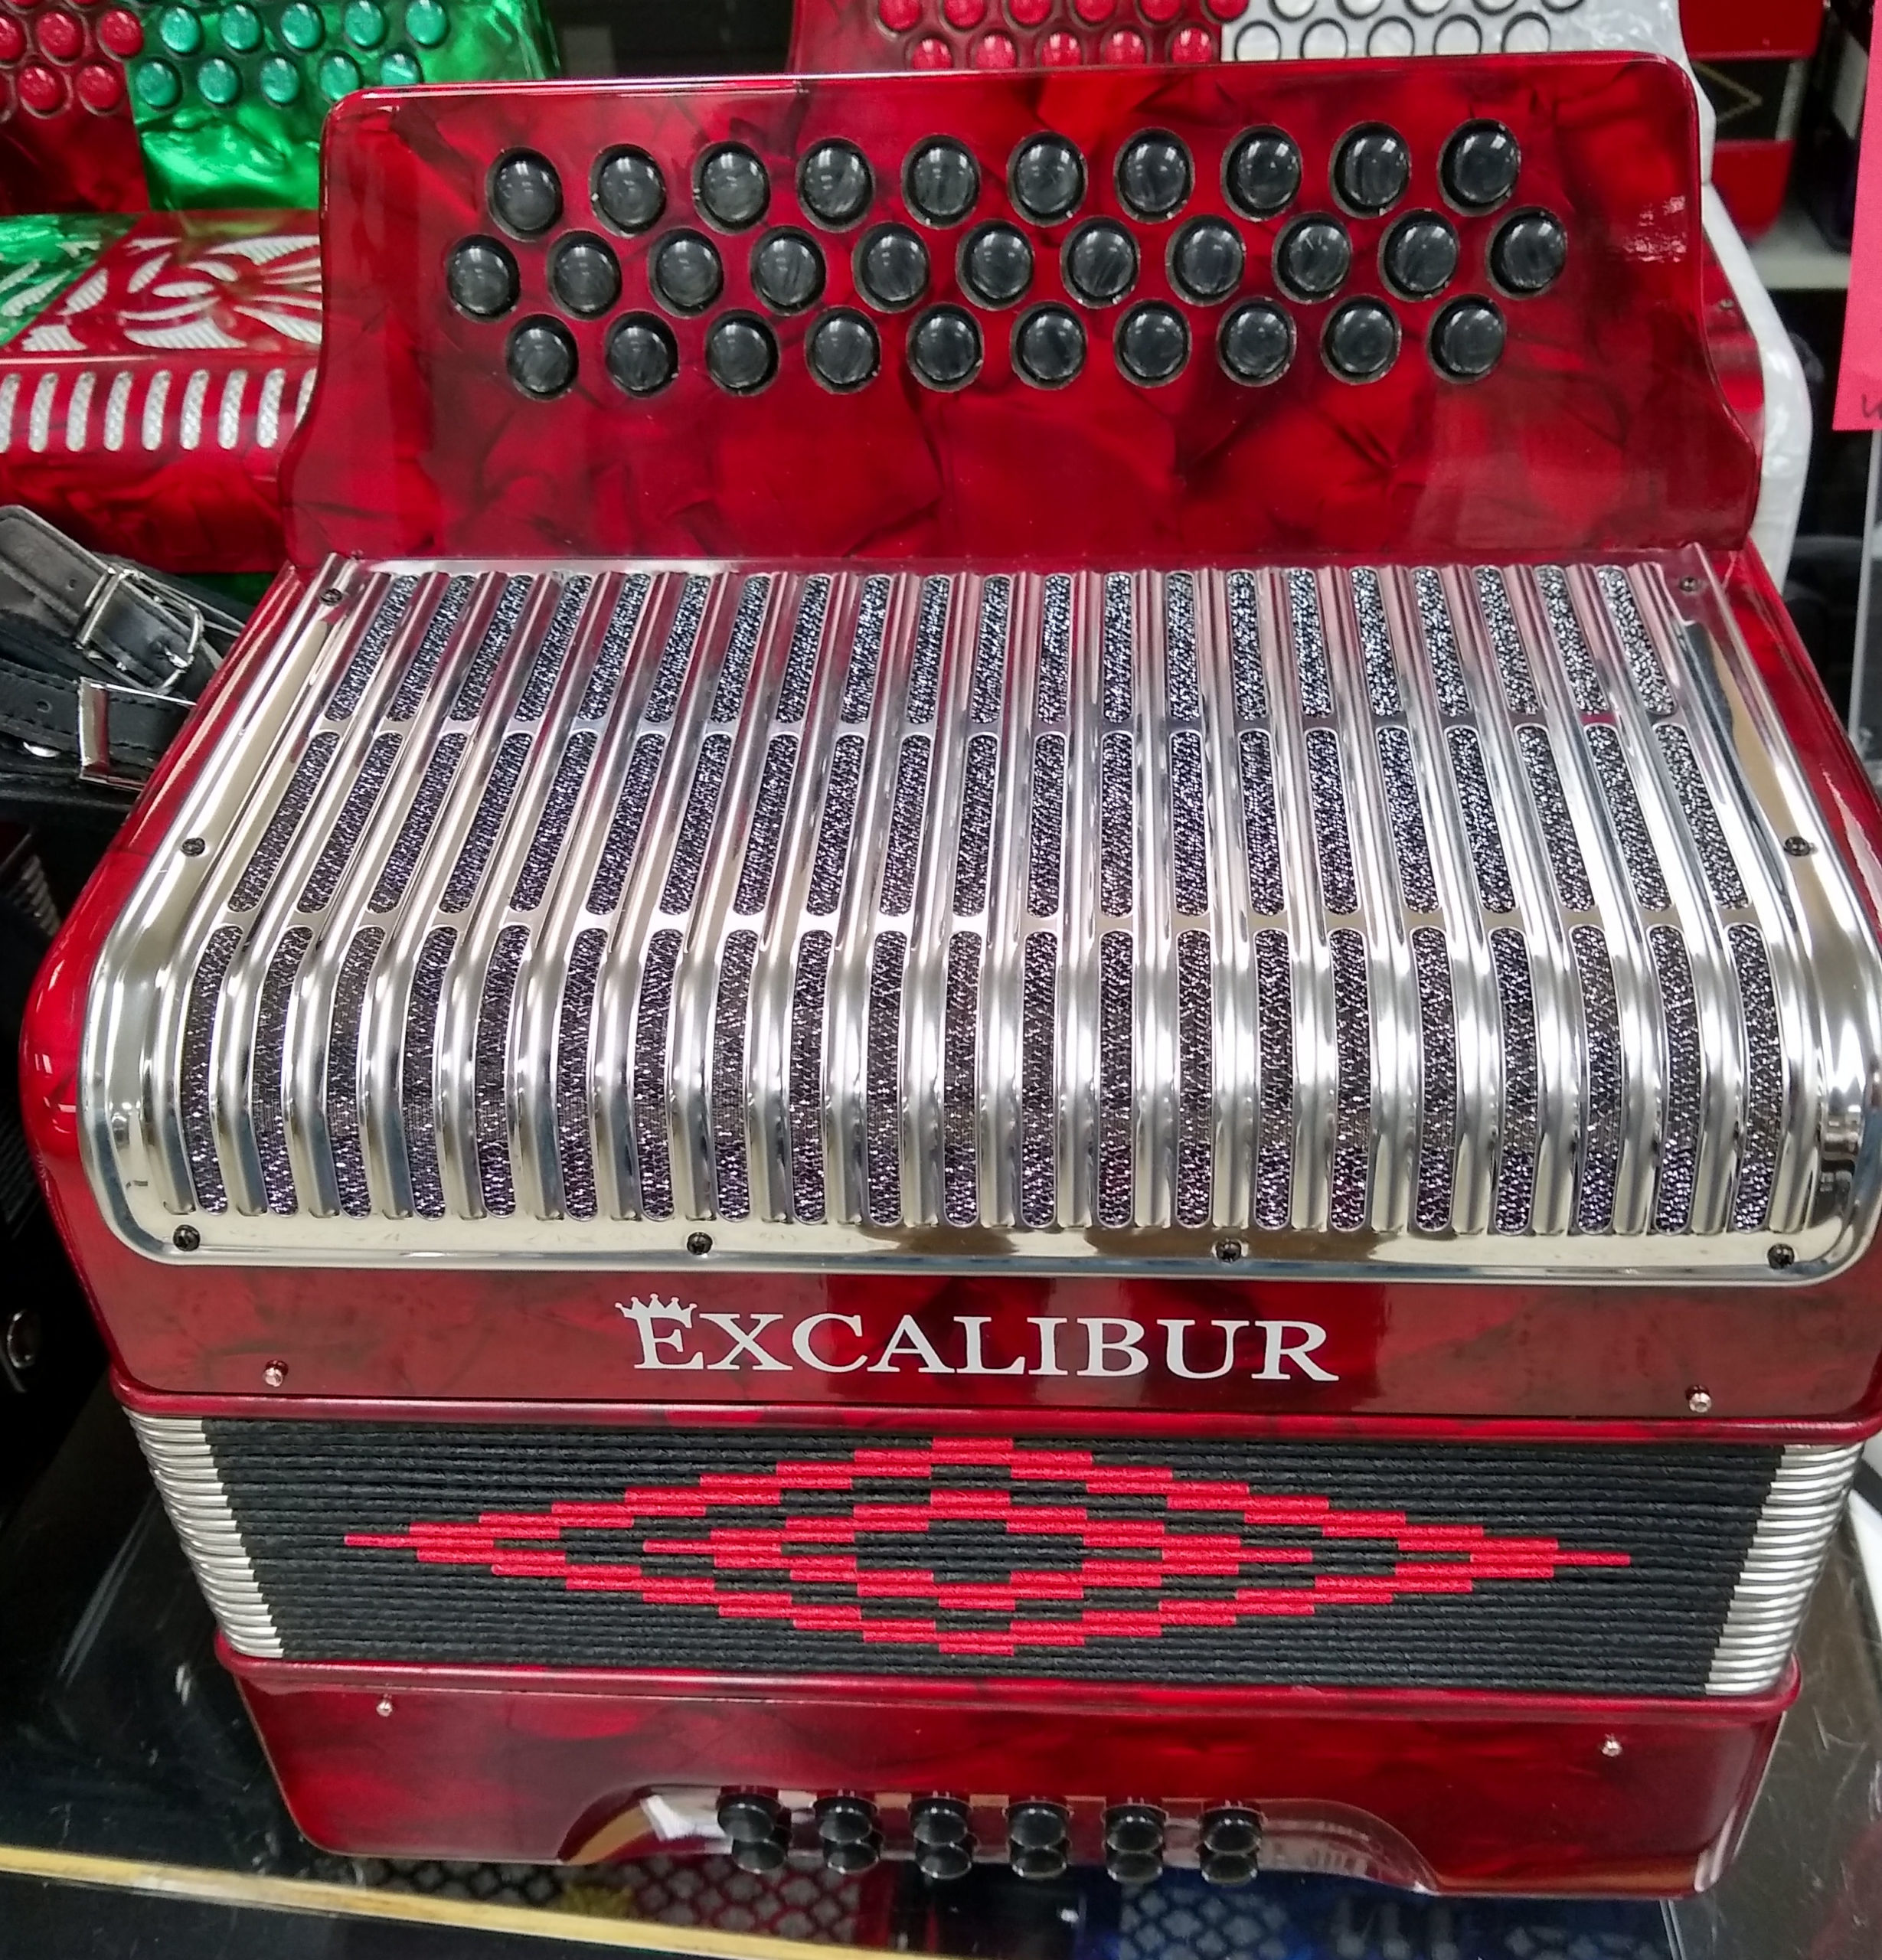 Excalibur Super Classic PSI 3 Row - Button Accordion - Red/Green - Key of FBE